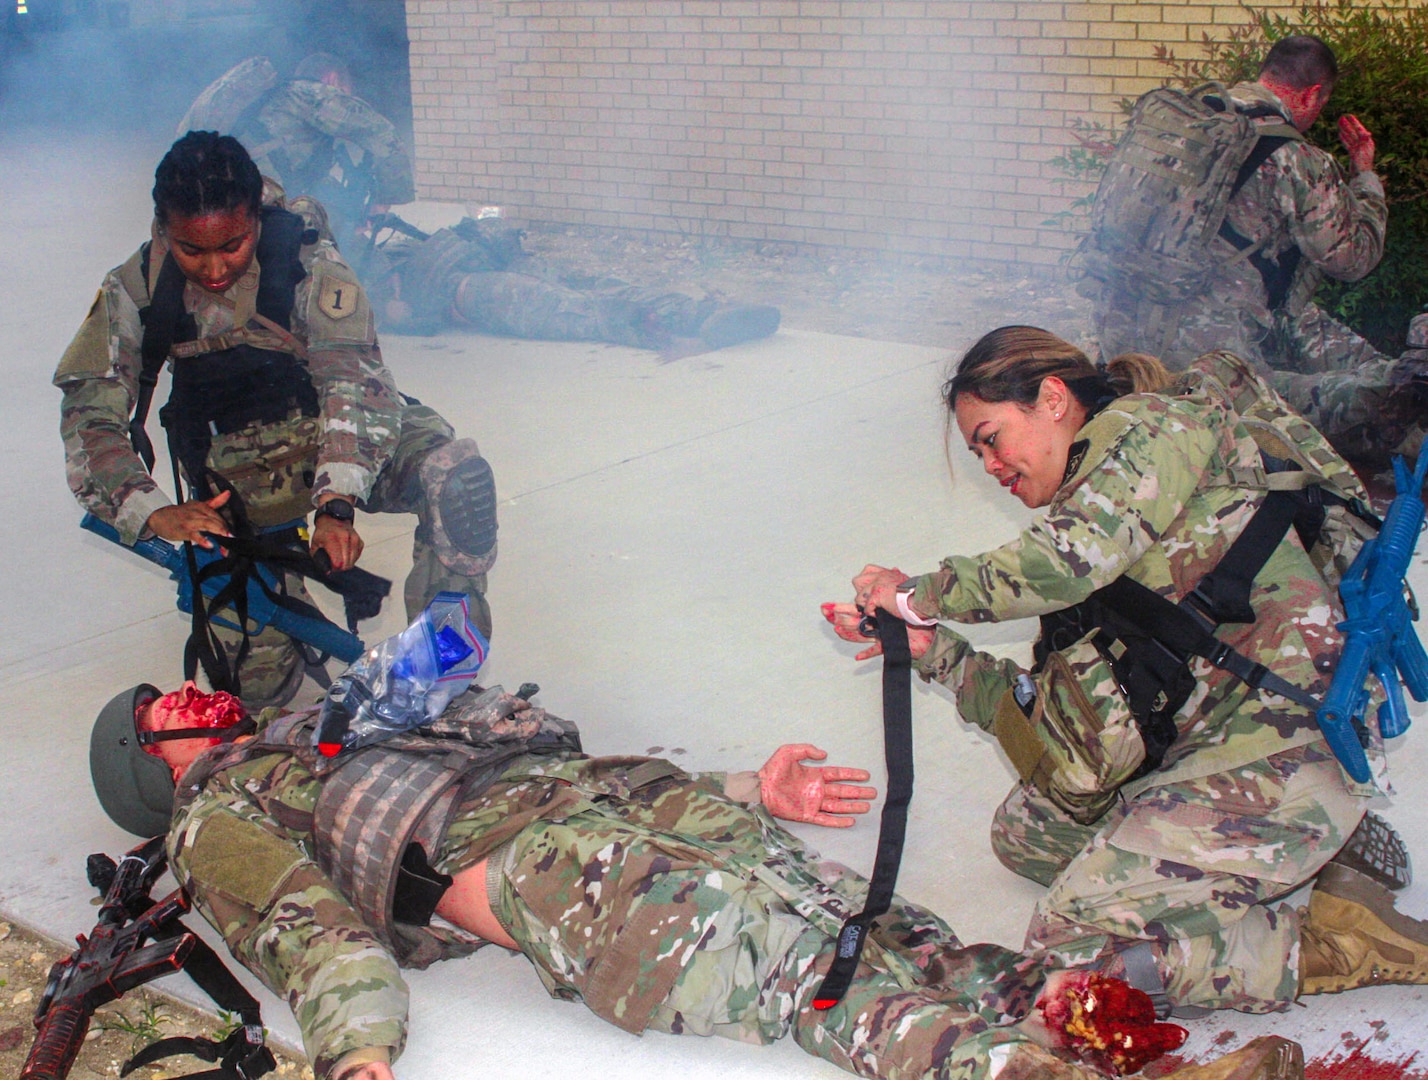 Students in the Combat Casualty Medical Care Course at Joint Base San Antonio-Fort Sam Houston experience aiding injured soldiers in the field compared to in a medical facility.